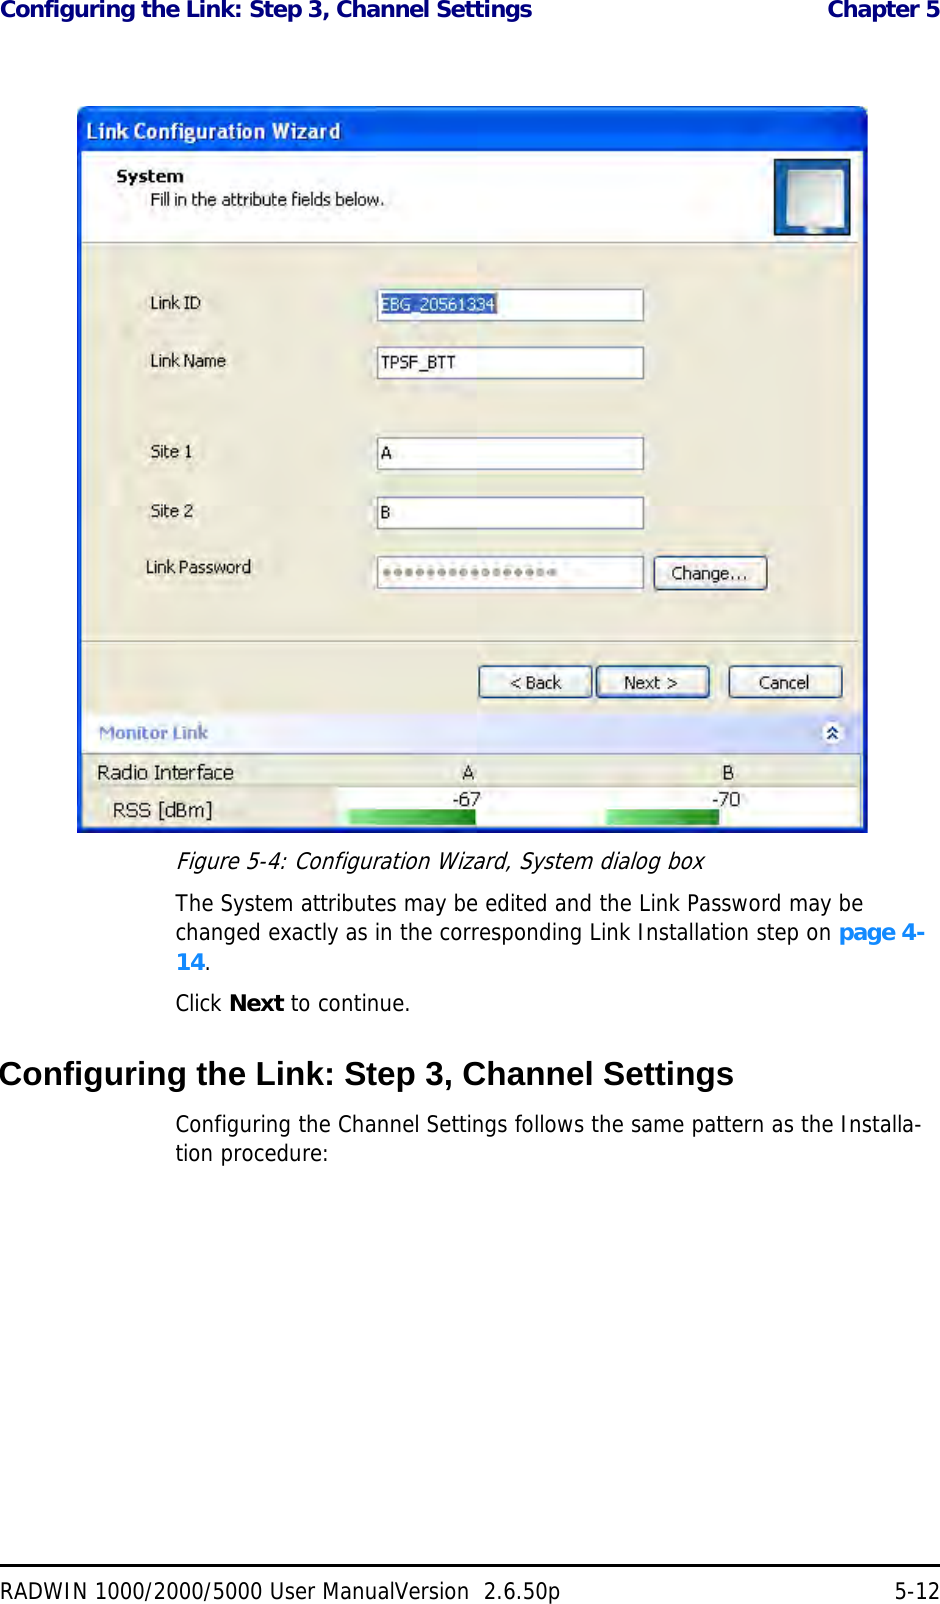 Configuring the Link: Step 3, Channel Settings  Chapter 5RADWIN 1000/2000/5000 User ManualVersion  2.6.50p 5-12Figure 5-4: Configuration Wizard, System dialog boxThe System attributes may be edited and the Link Password may be changed exactly as in the corresponding Link Installation step on page 4-14.Click Next to continue.Configuring the Link: Step 3, Channel SettingsConfiguring the Channel Settings follows the same pattern as the Installa-tion procedure: